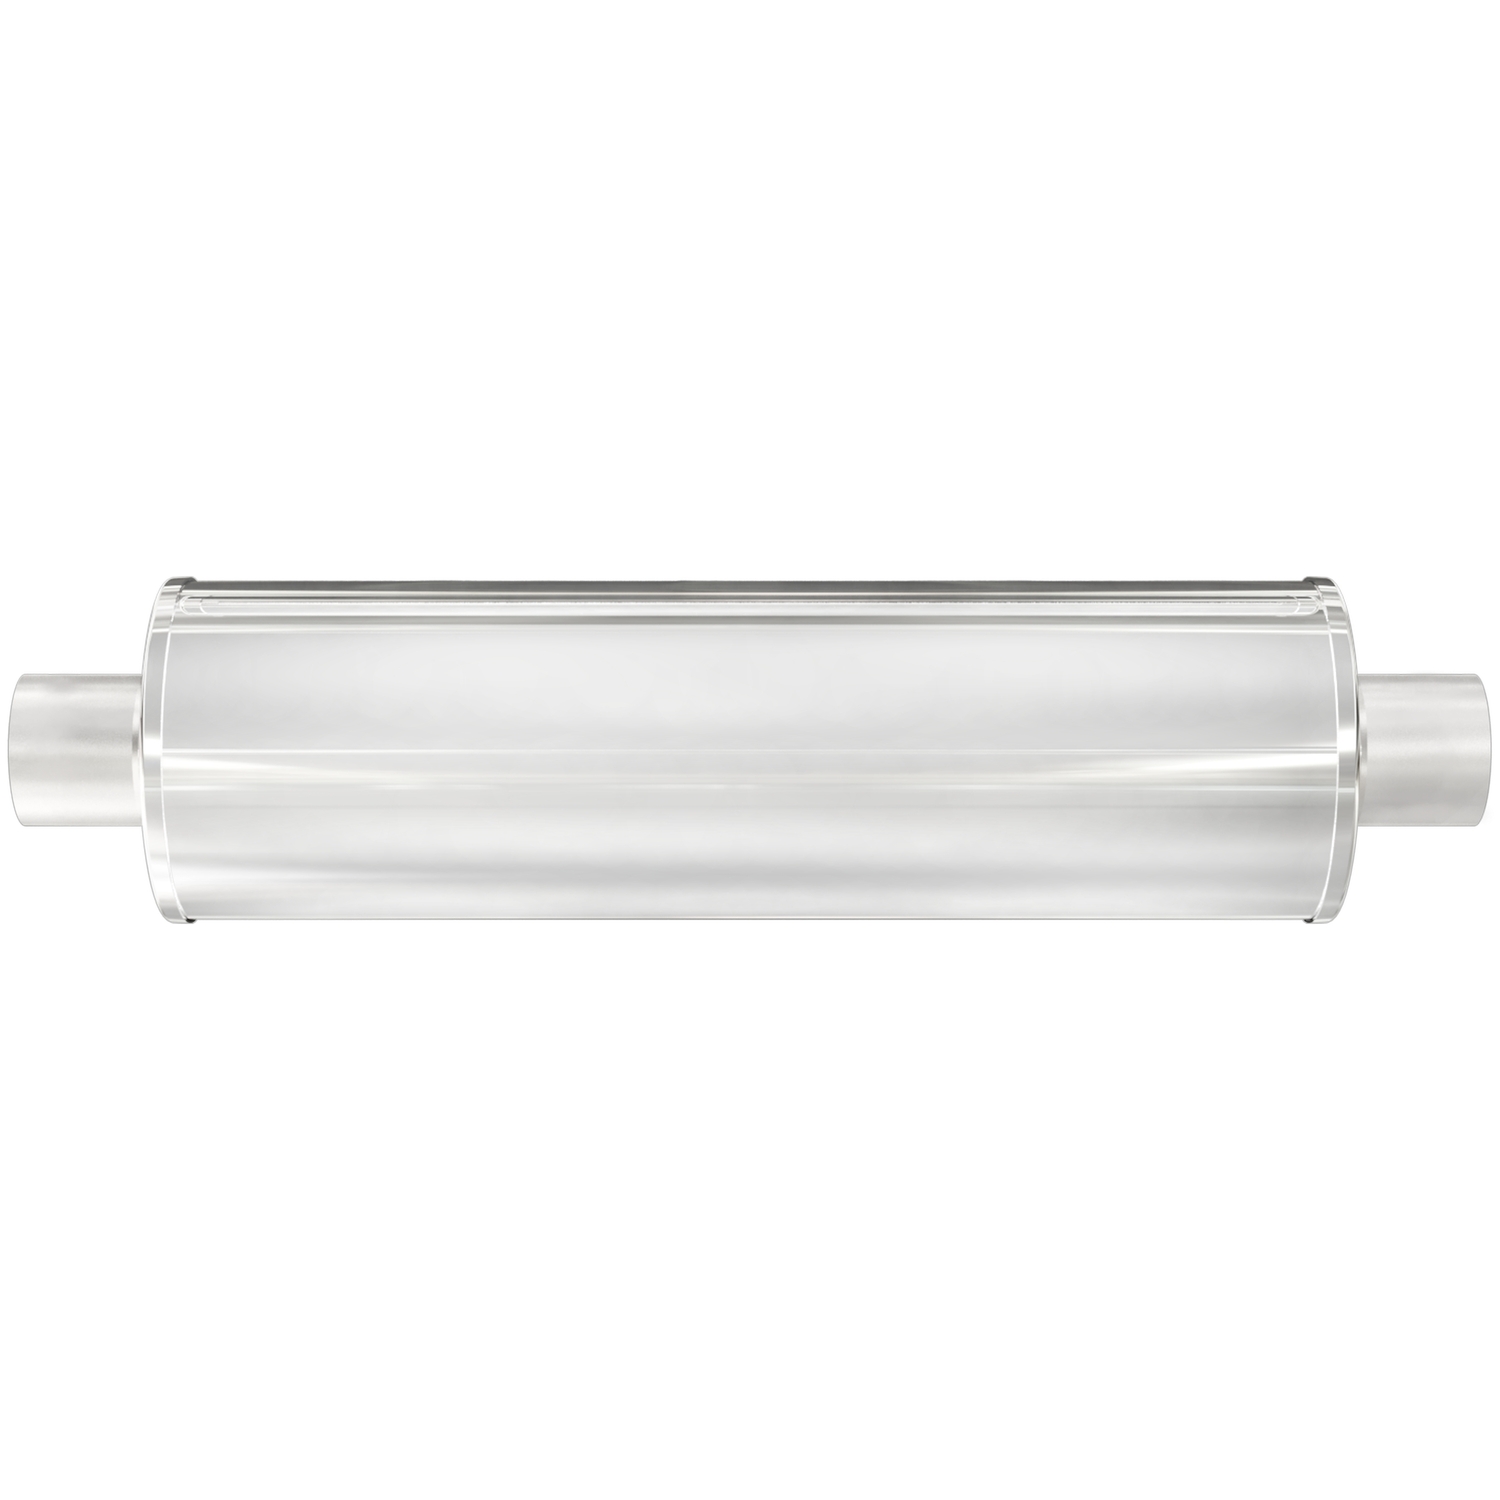 7" Round XL 3-Chamber Muffler Center In/Center Out: 3"/3" Body Length: 30" Overall Length: 36" Satin Finish